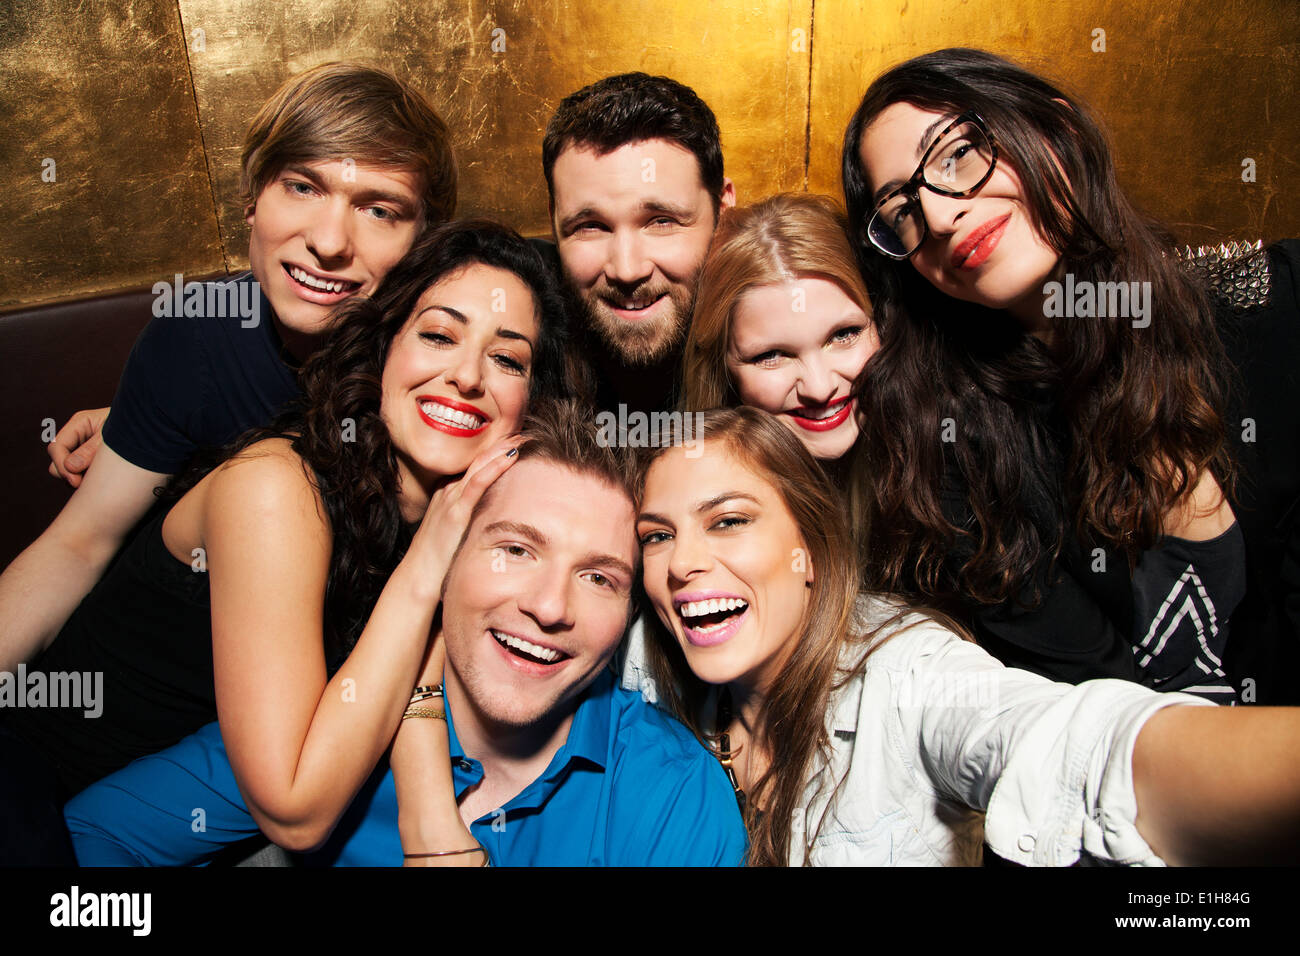 Portrait of group of male and female friends in nightclub Stock Photo